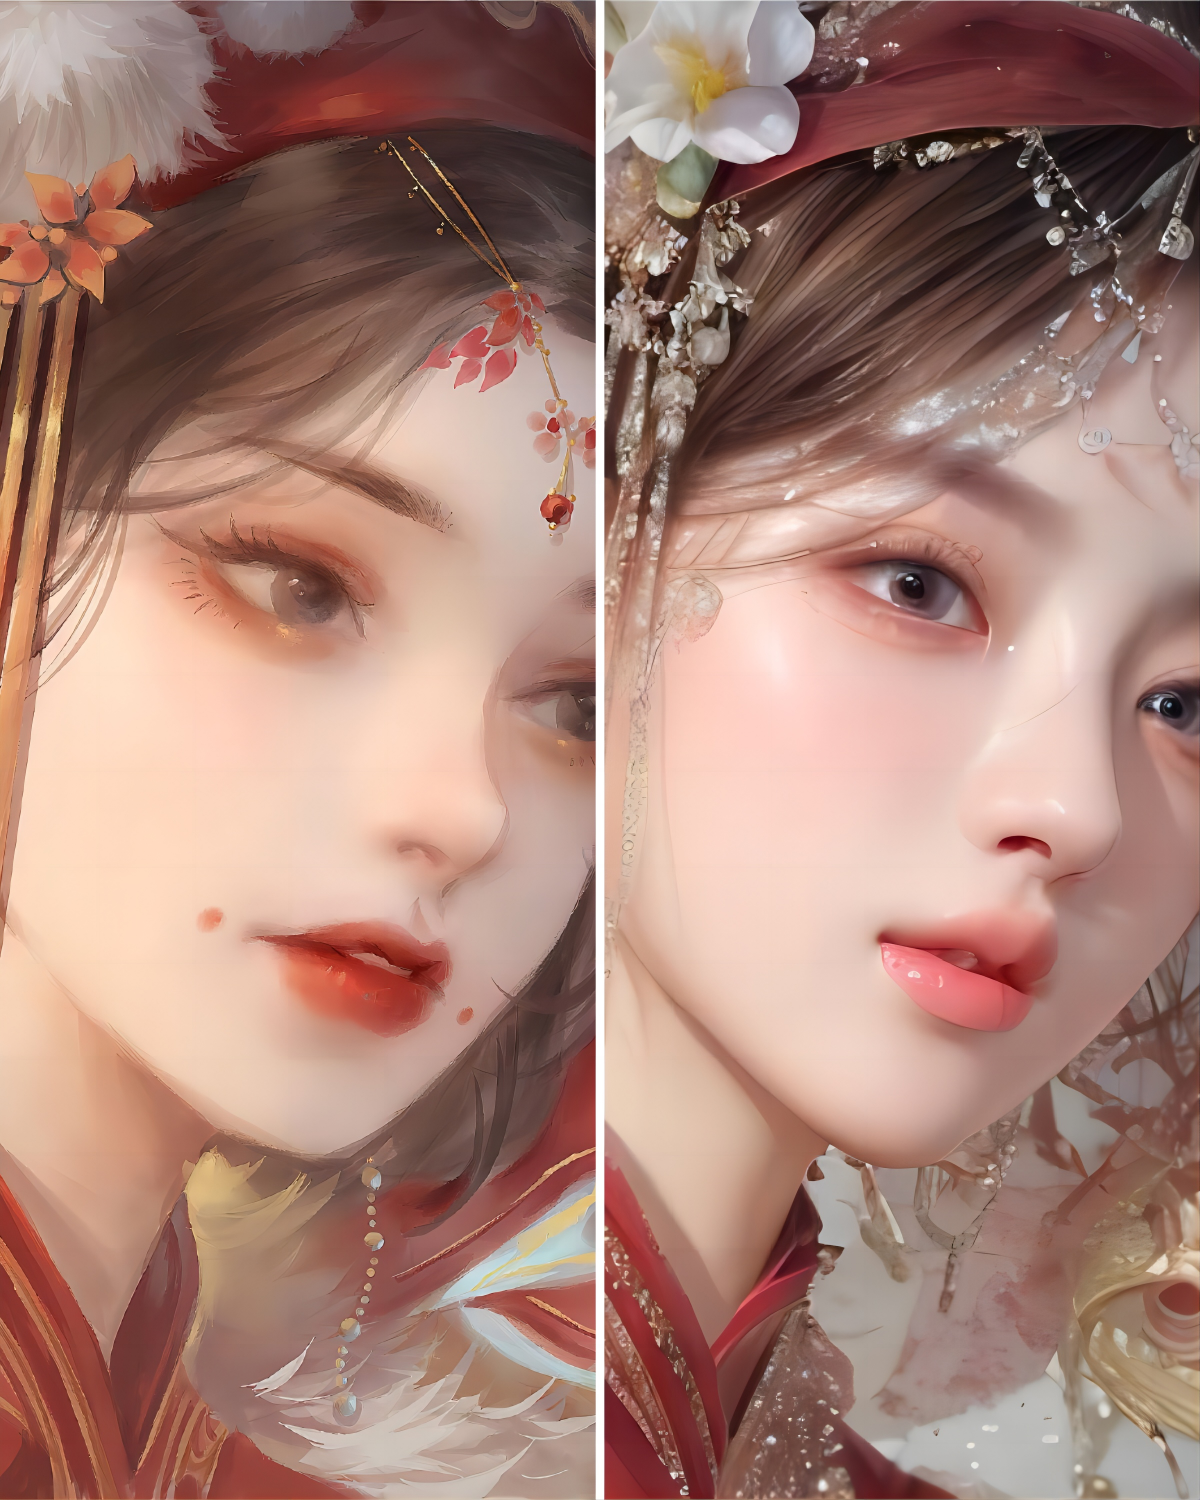 Upload a picture and click to transform anime girl into real girl. Closeup picture is prefer.
<br>
<br>上传图片，一键将动漫女孩转化为真人。最好是特写照片。
<br>
<br>画像をアップロードしてクリックすると、アニメの女の子が本物の女の子に変身します。クローズアップ画像が望ましい。